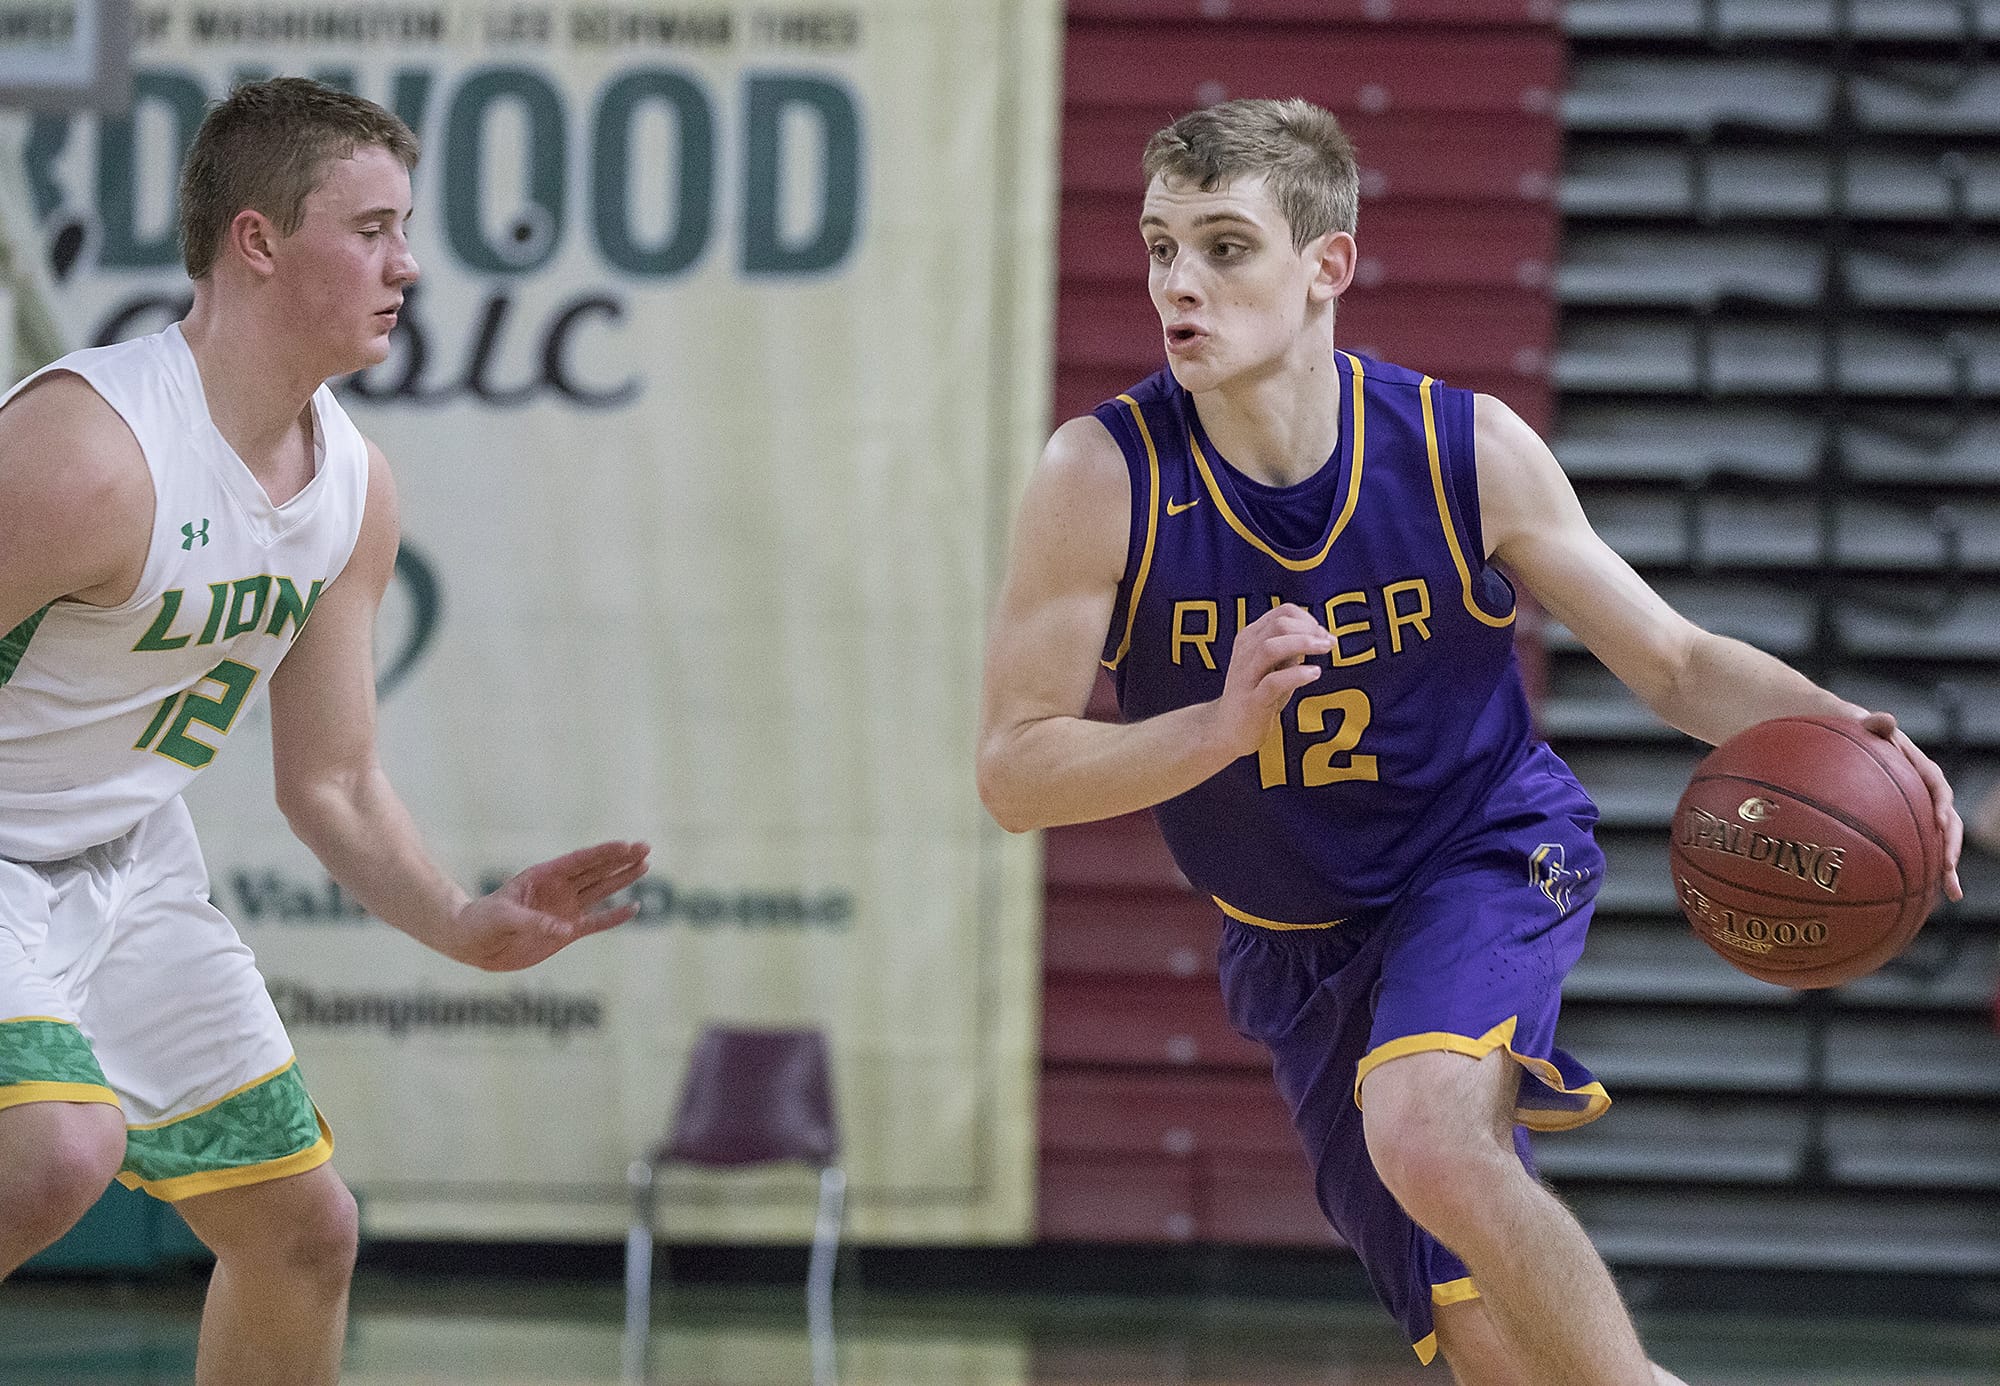 Columbia River's Jacob Hjort (12) drives past Lynden's Brock Heppner (12) during the WIAA 2A boys state basketball tournament on Thursday, Mar. 1, 2018, at the Yakima Valley SunDome. Lynden Lions defeated Columbia River Chieftains 44-33.